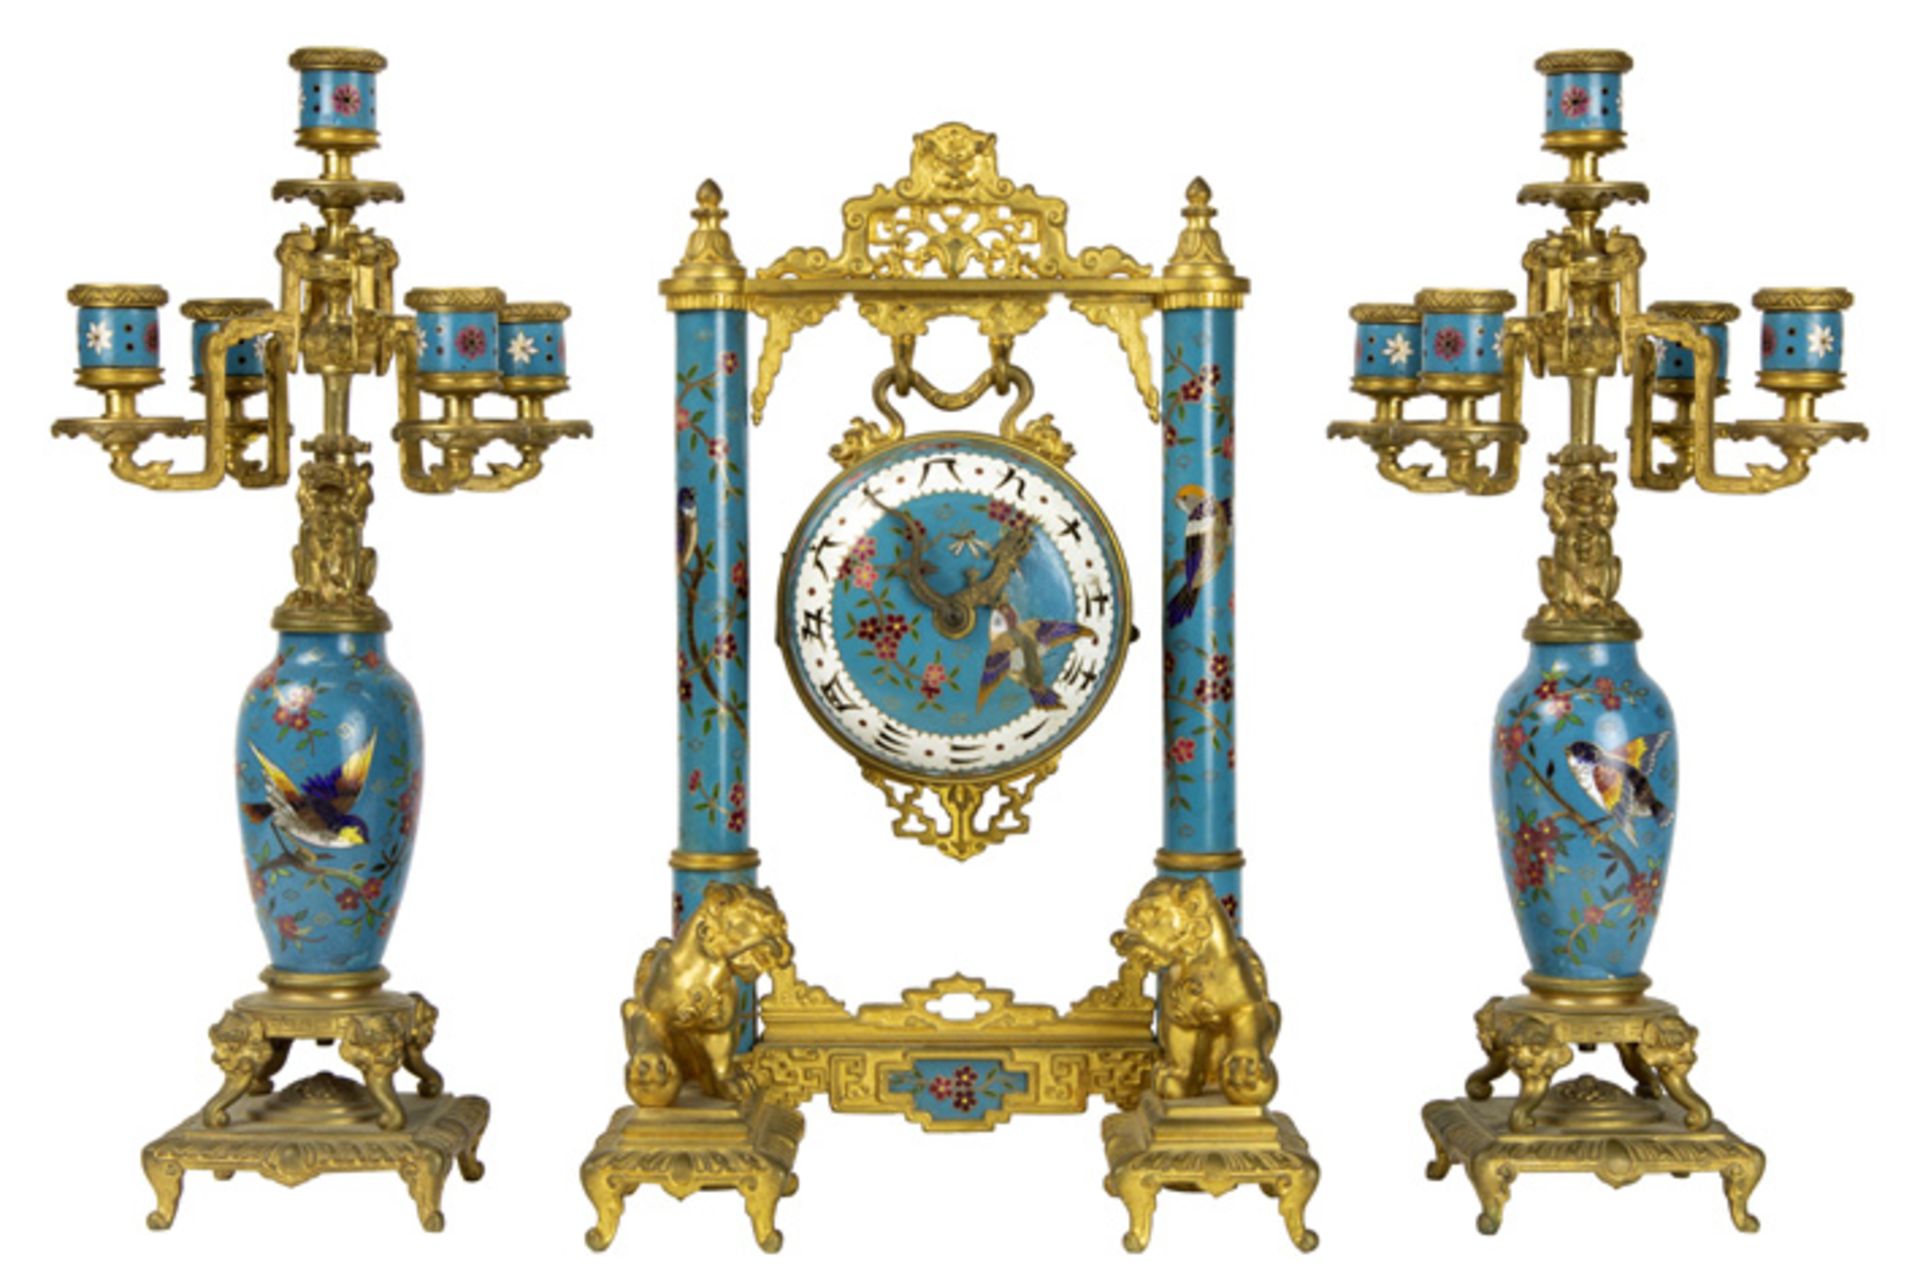 19th Cent. French Napoleon III "Edouard Lièvre" Japanese style garniture by "L'Escalier de Cristal -